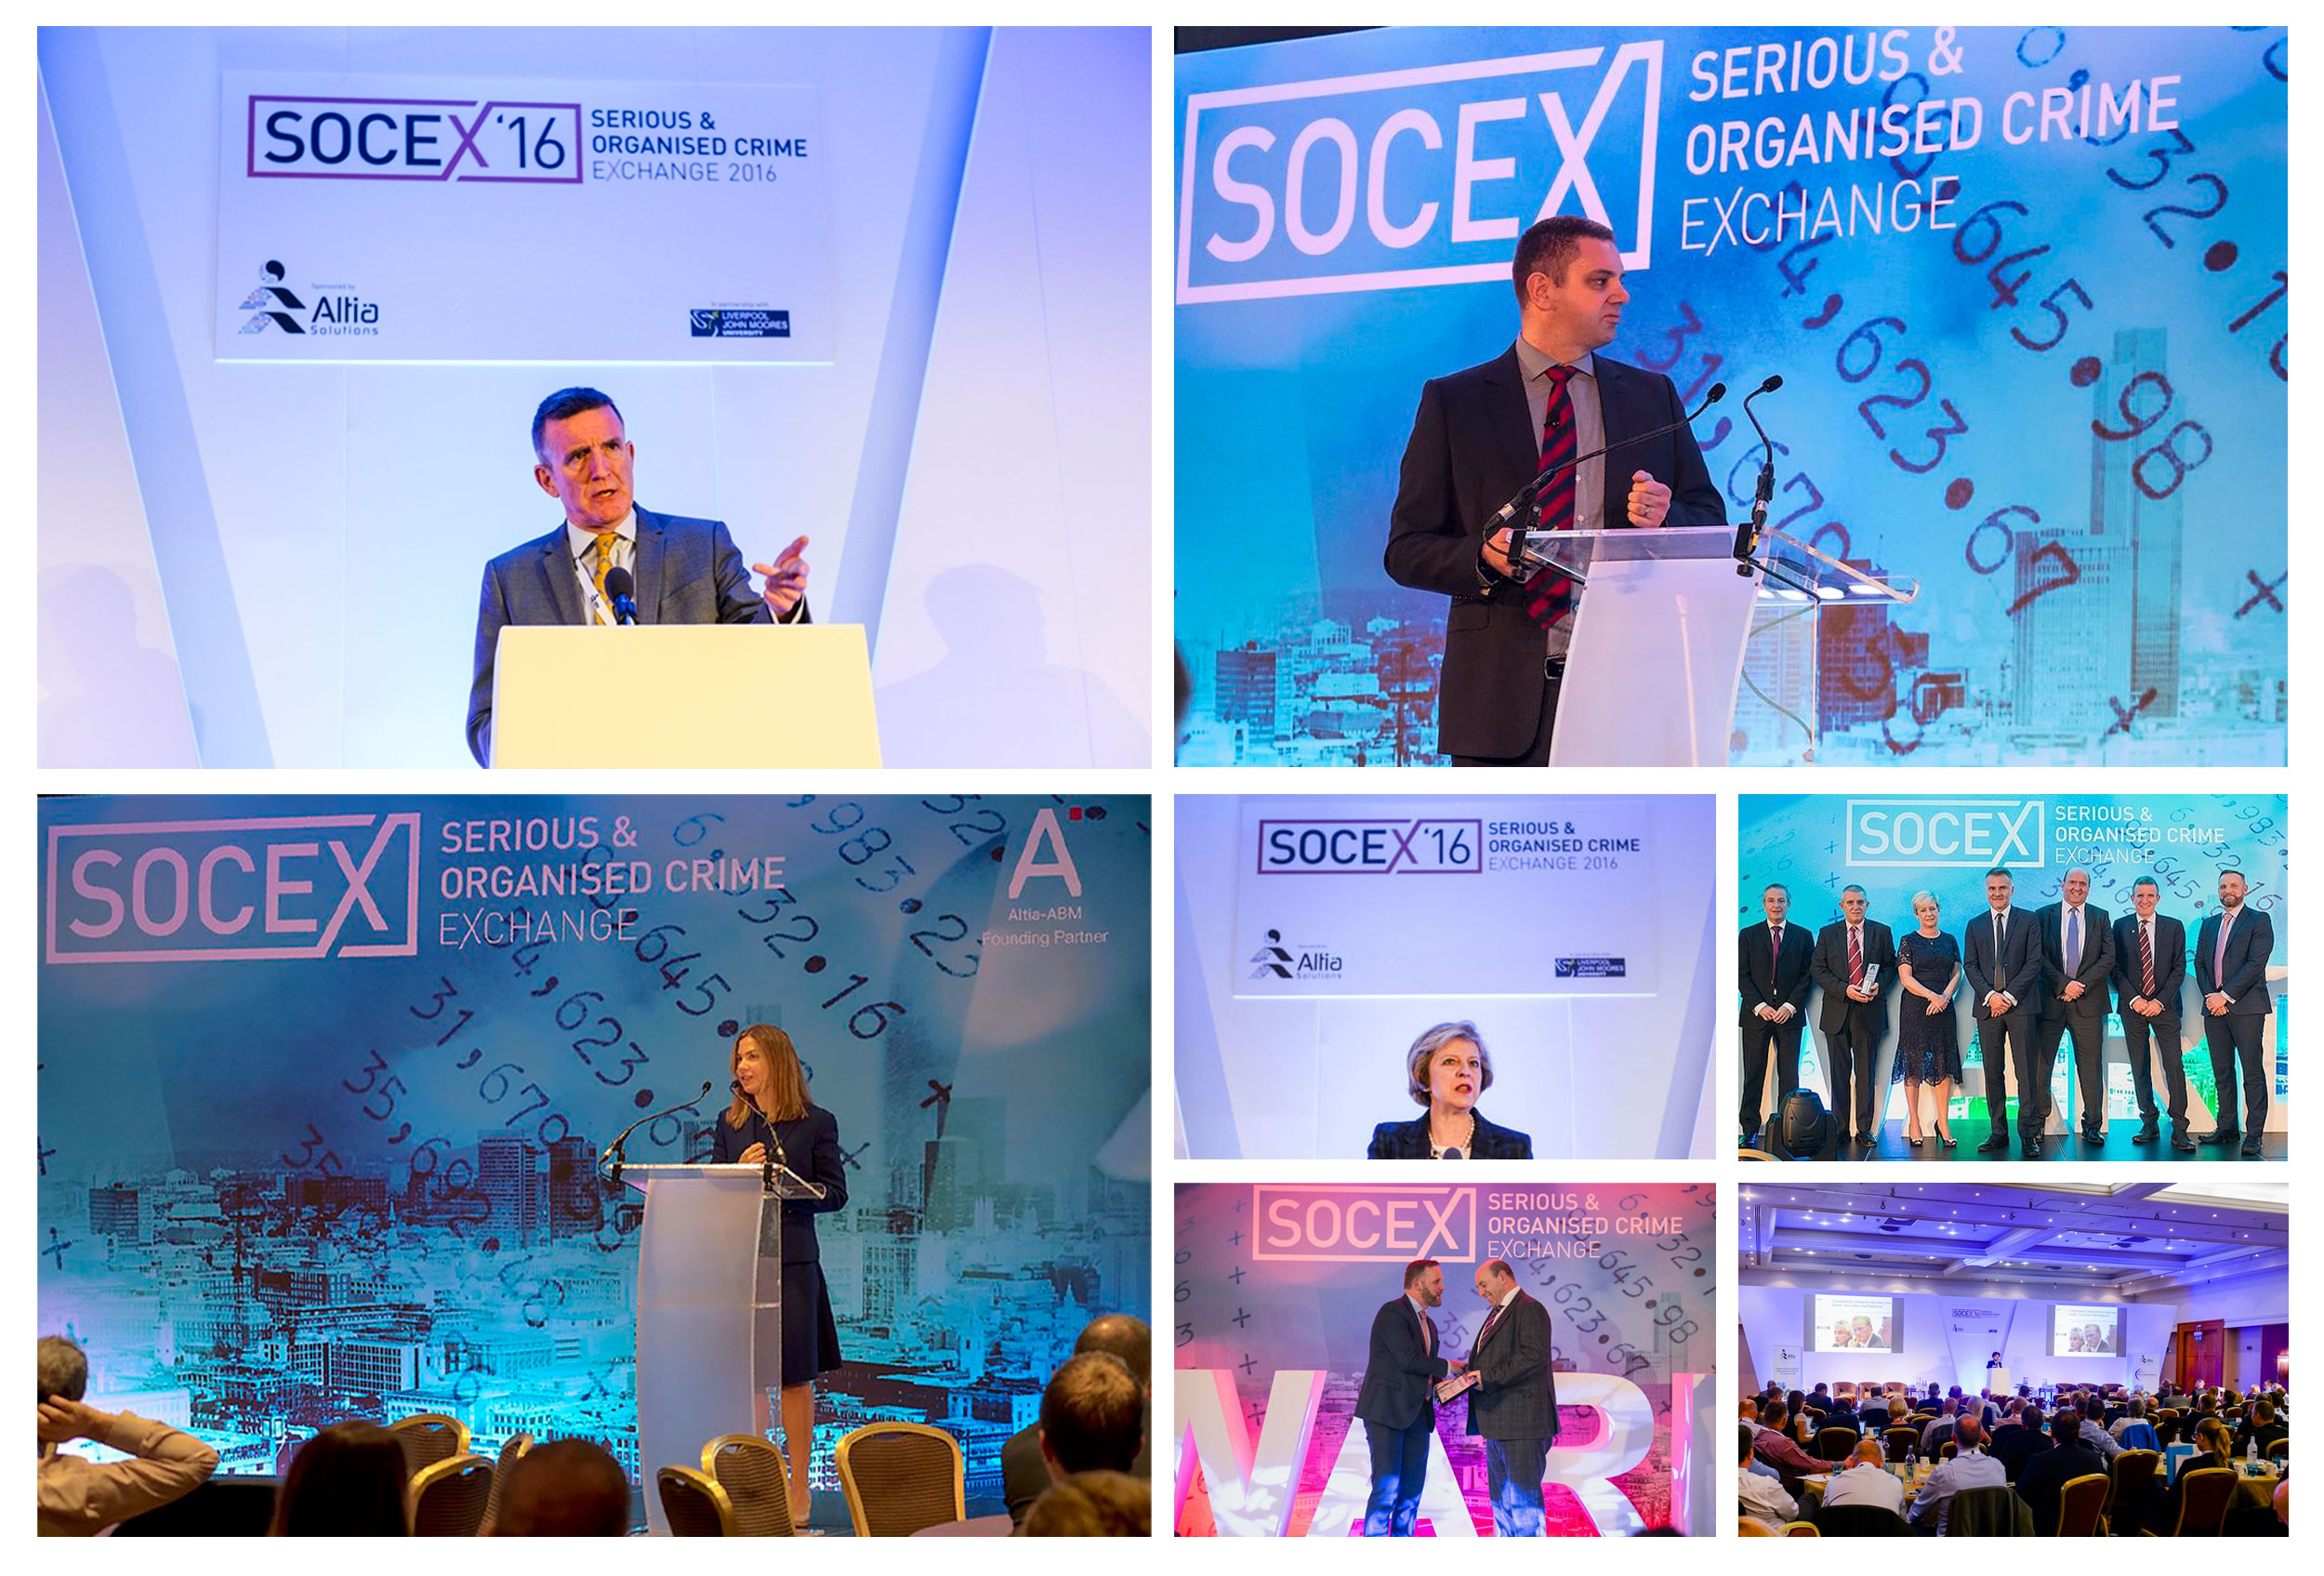 Collection of SOCEX conference images.